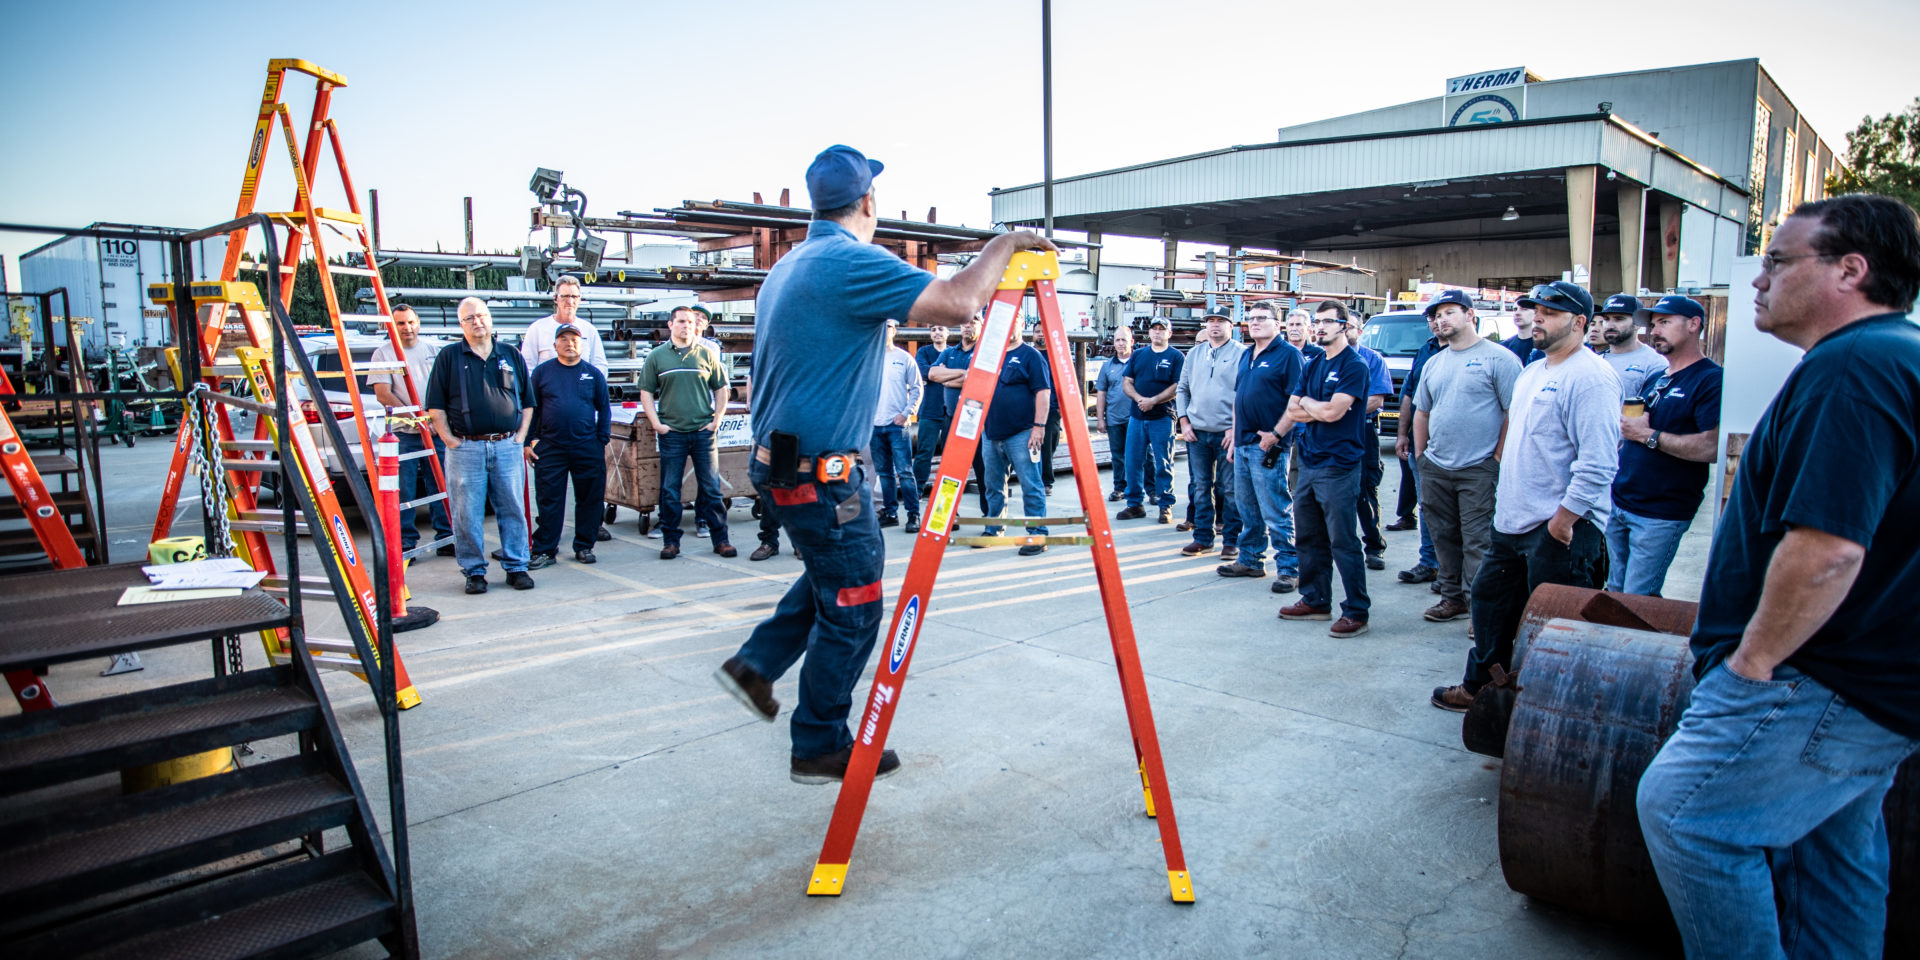 Crowd watching man demonstrate how to use ladders safely